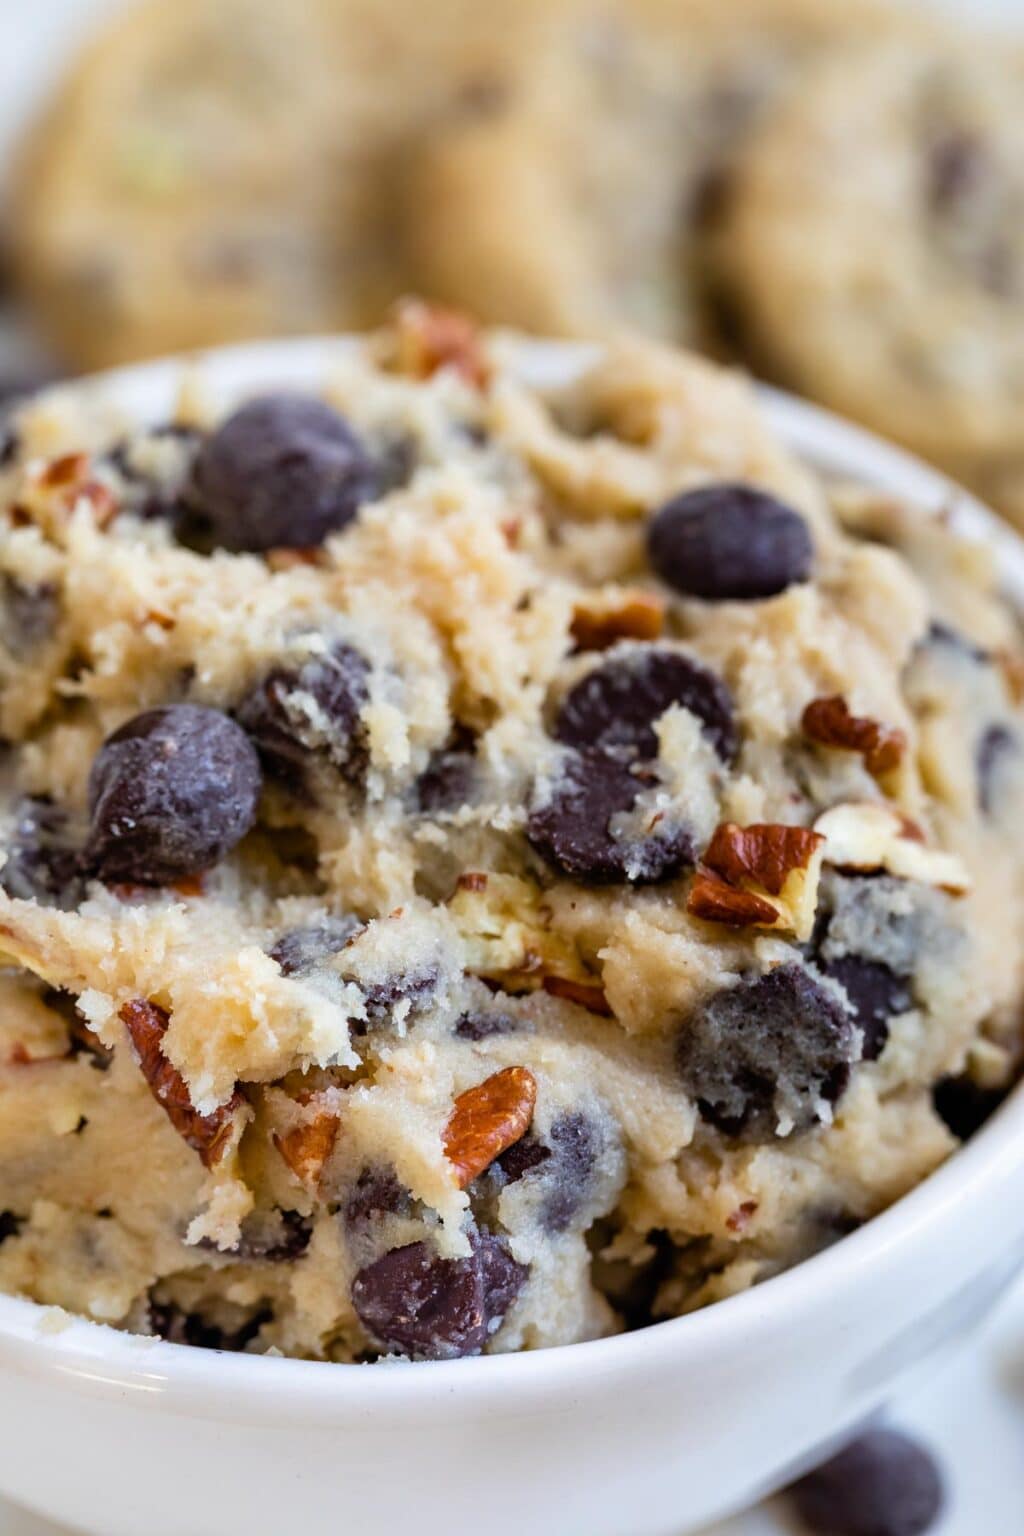 Edible Cookie Dough Recipe (safe to eat) - Crazy for Crust